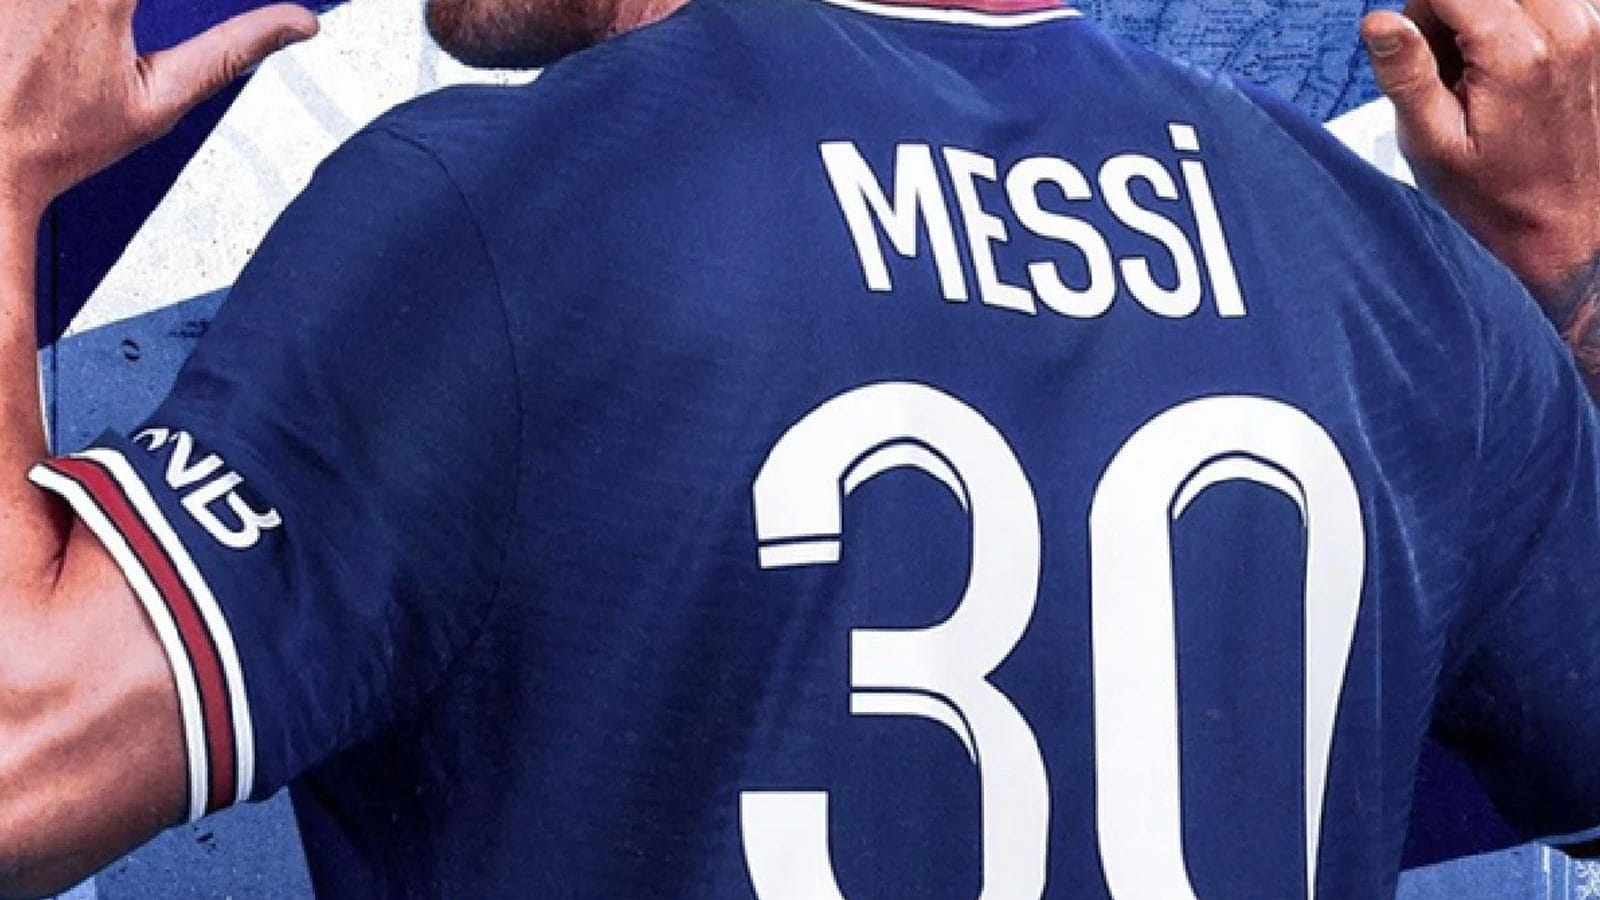 Here's Why Lionel Messi Chose Jersey Number 30